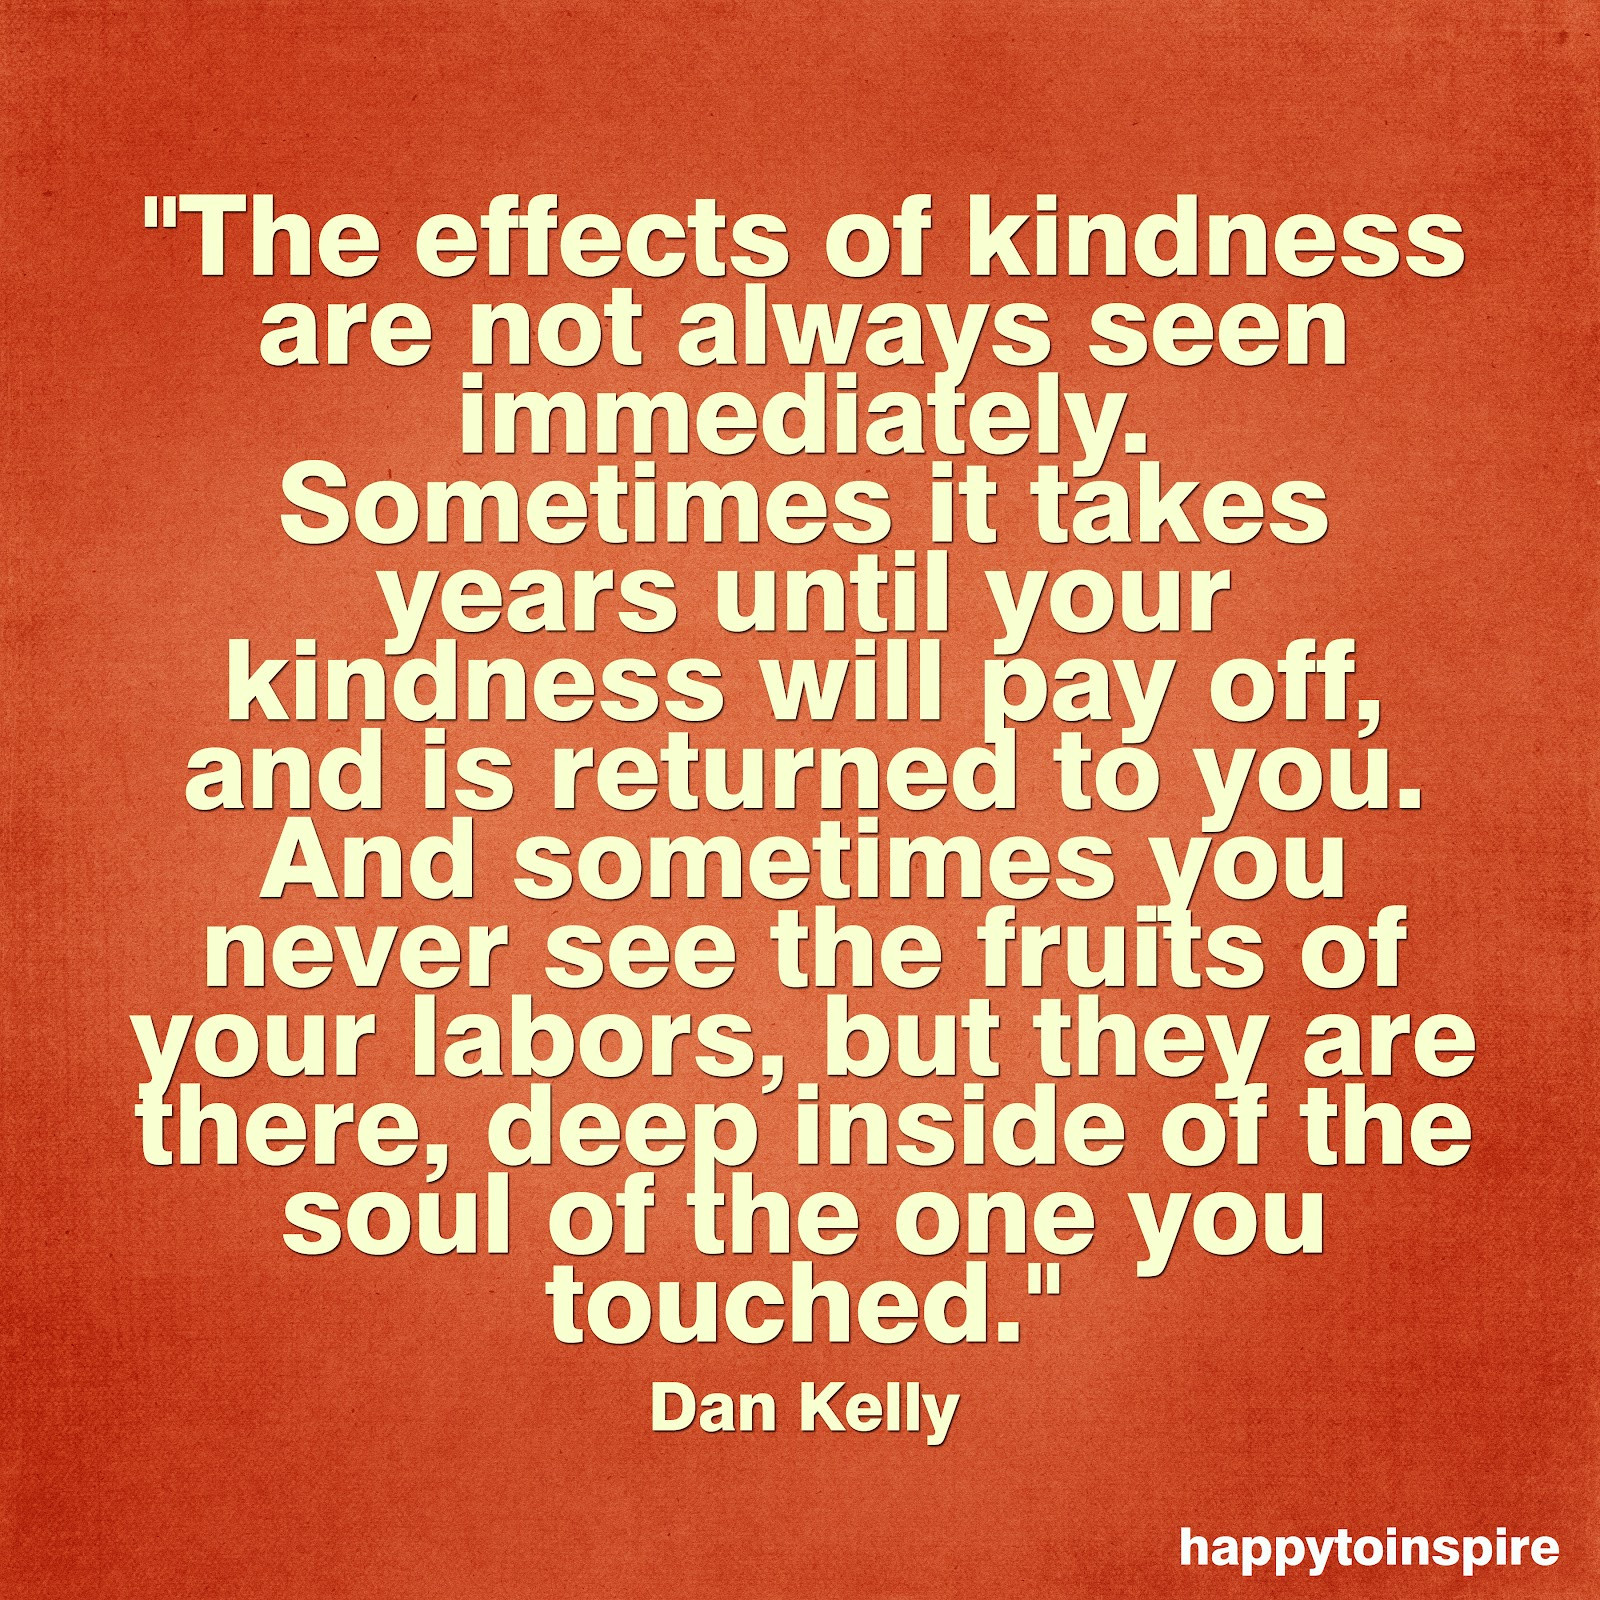 Quote About Kindness
 Happy To Inspire June 2012